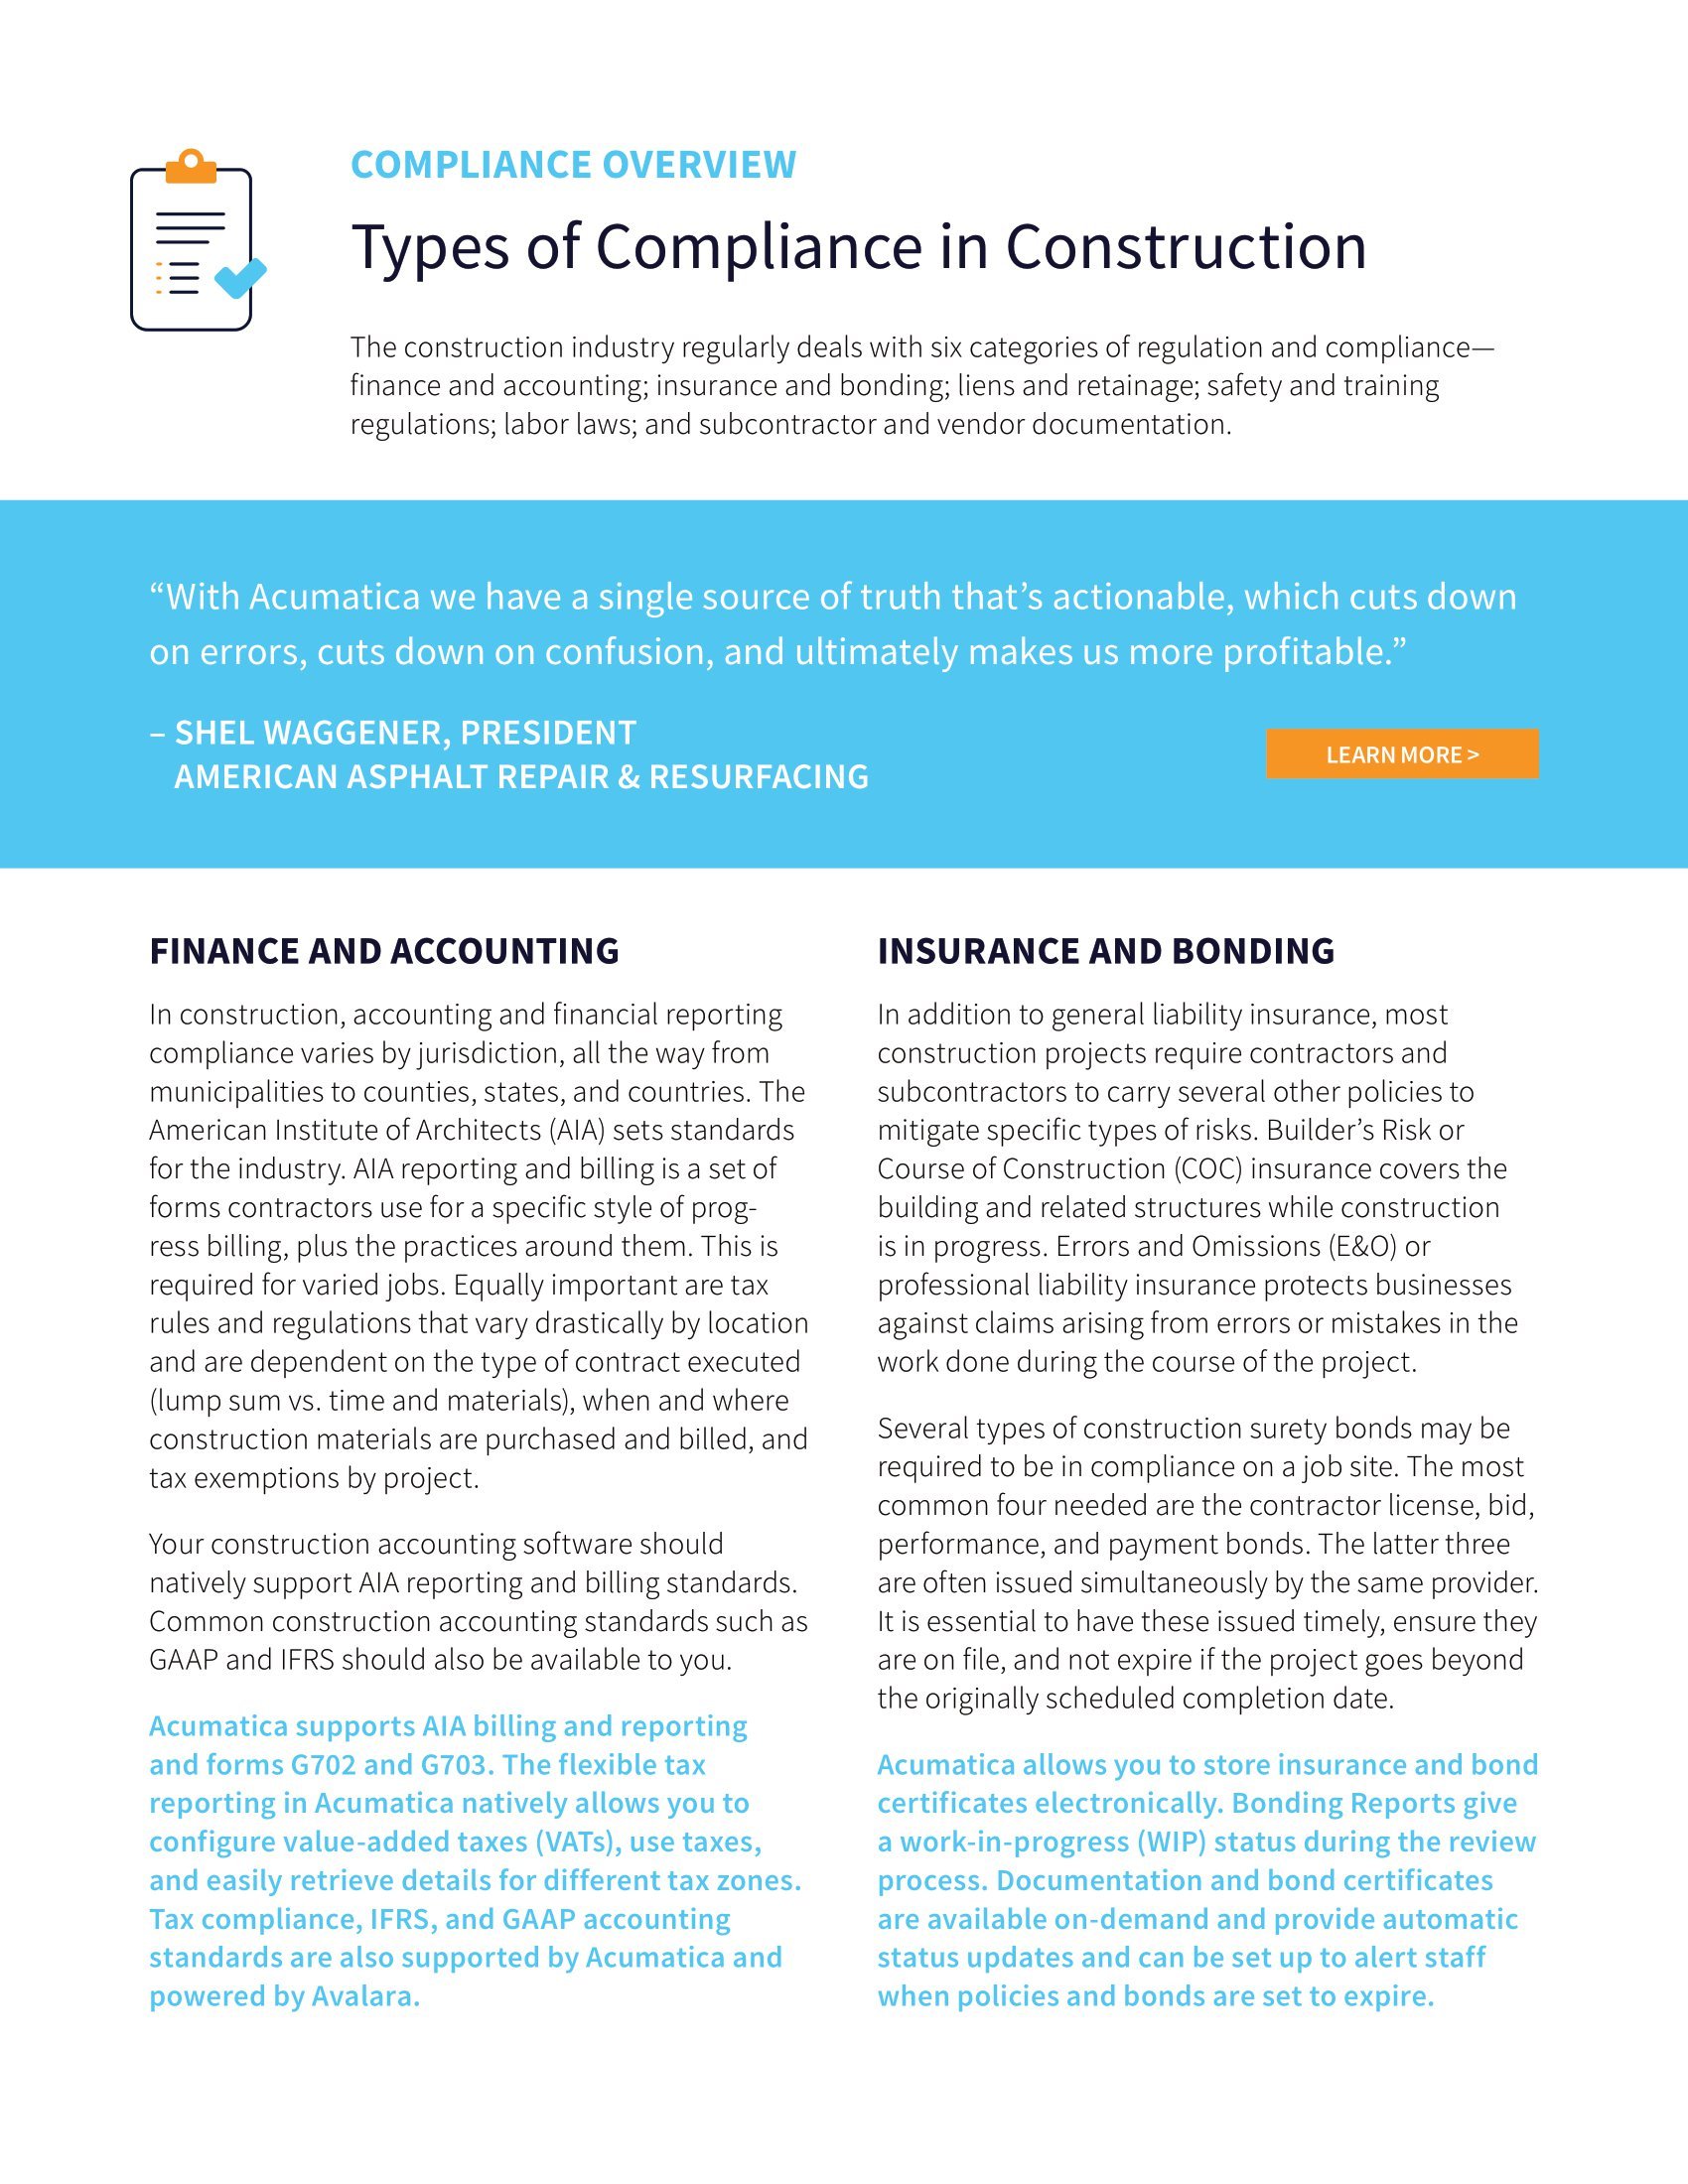 So Many Construction Regulations, So Easily Handled with the Right Construction Compliance Software, page 1